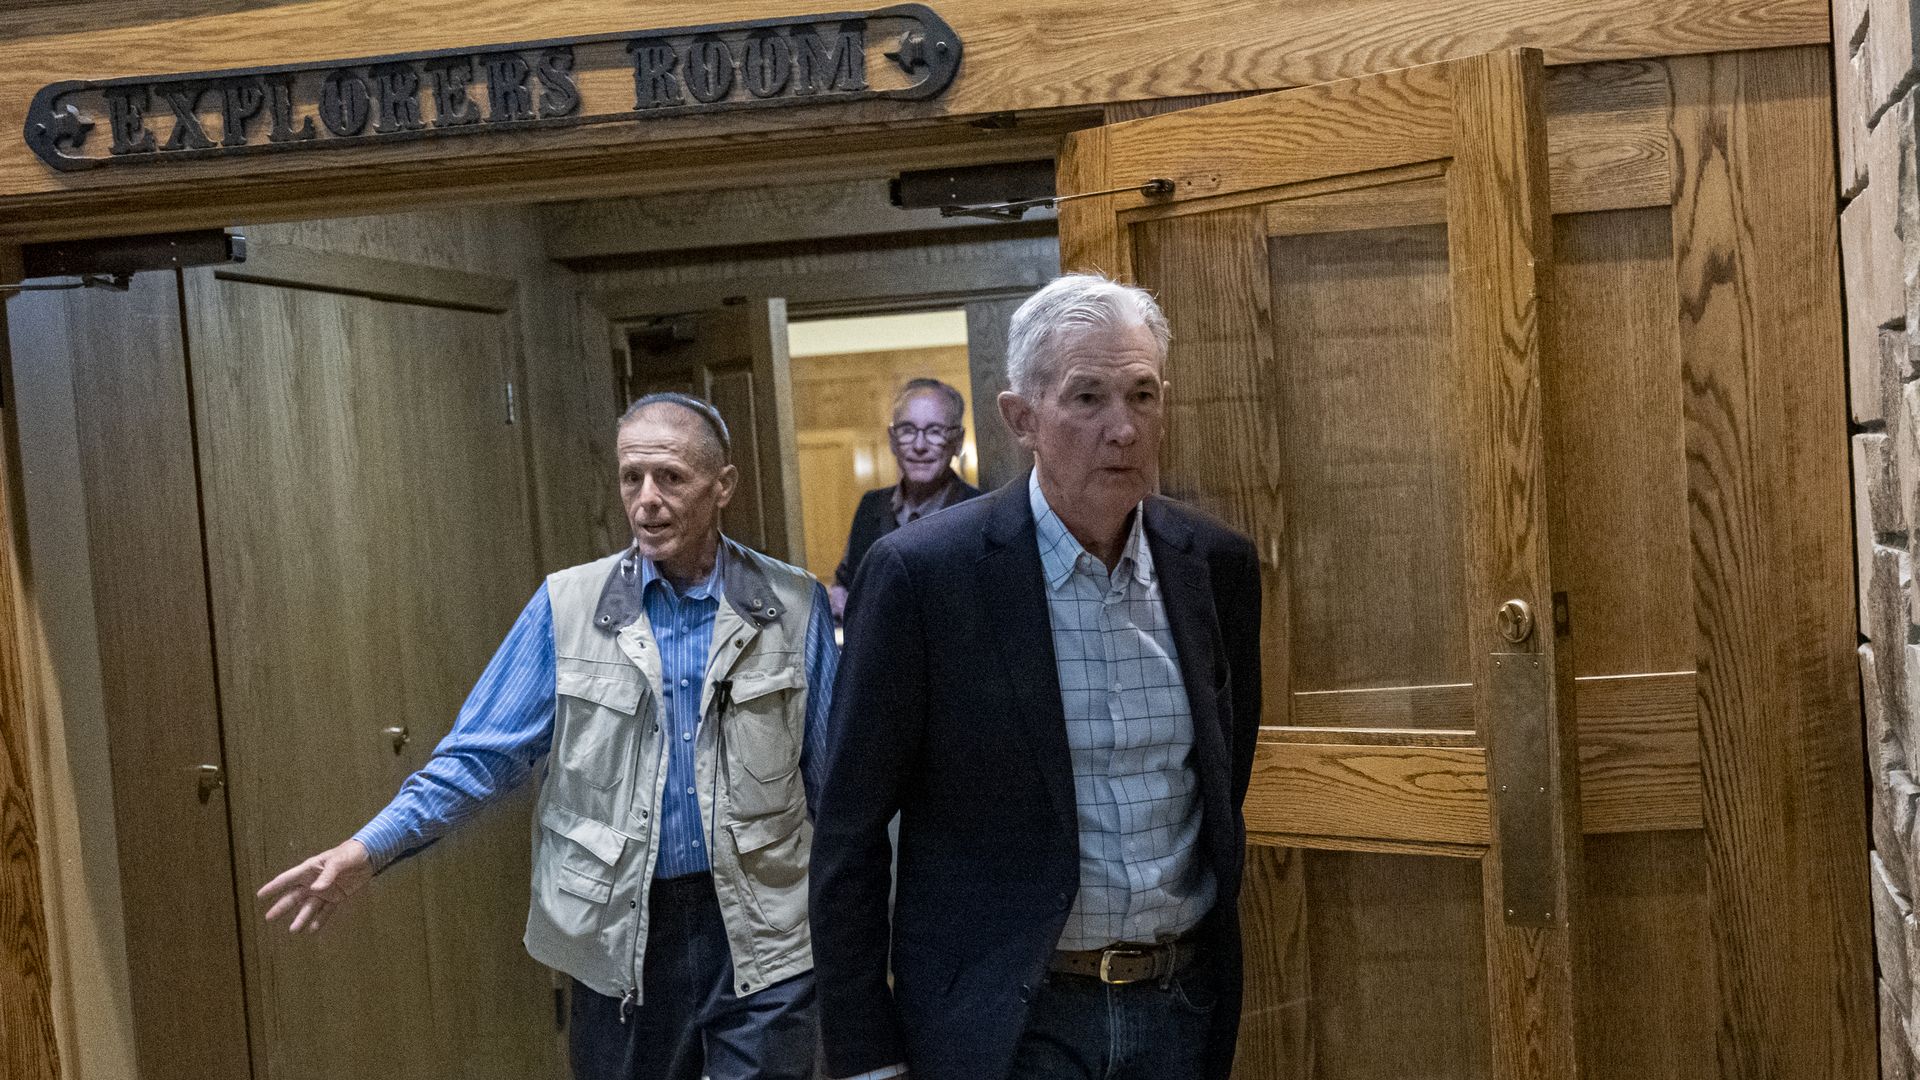 Federal Reserve Chair Jerome Powell in Jackson Hole